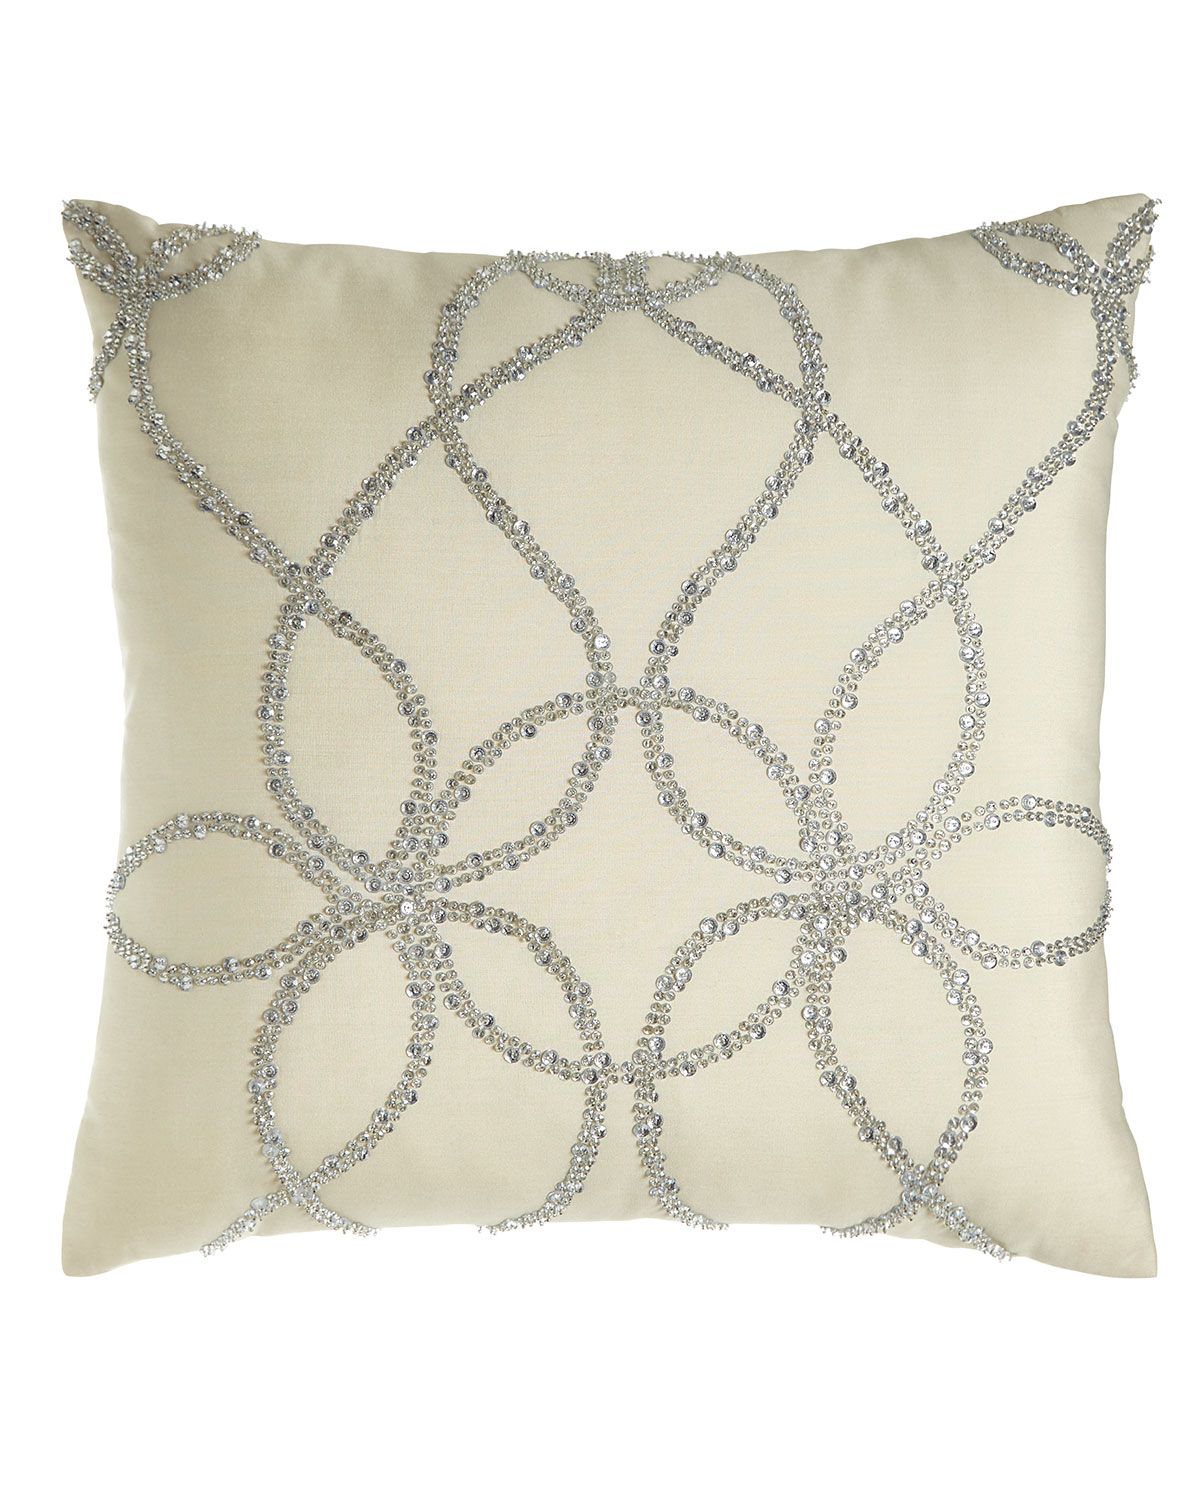 Ivory Silk Pillow with Silver Beading, 22"Sq. - Lili Alessandra | Neiman Marcus